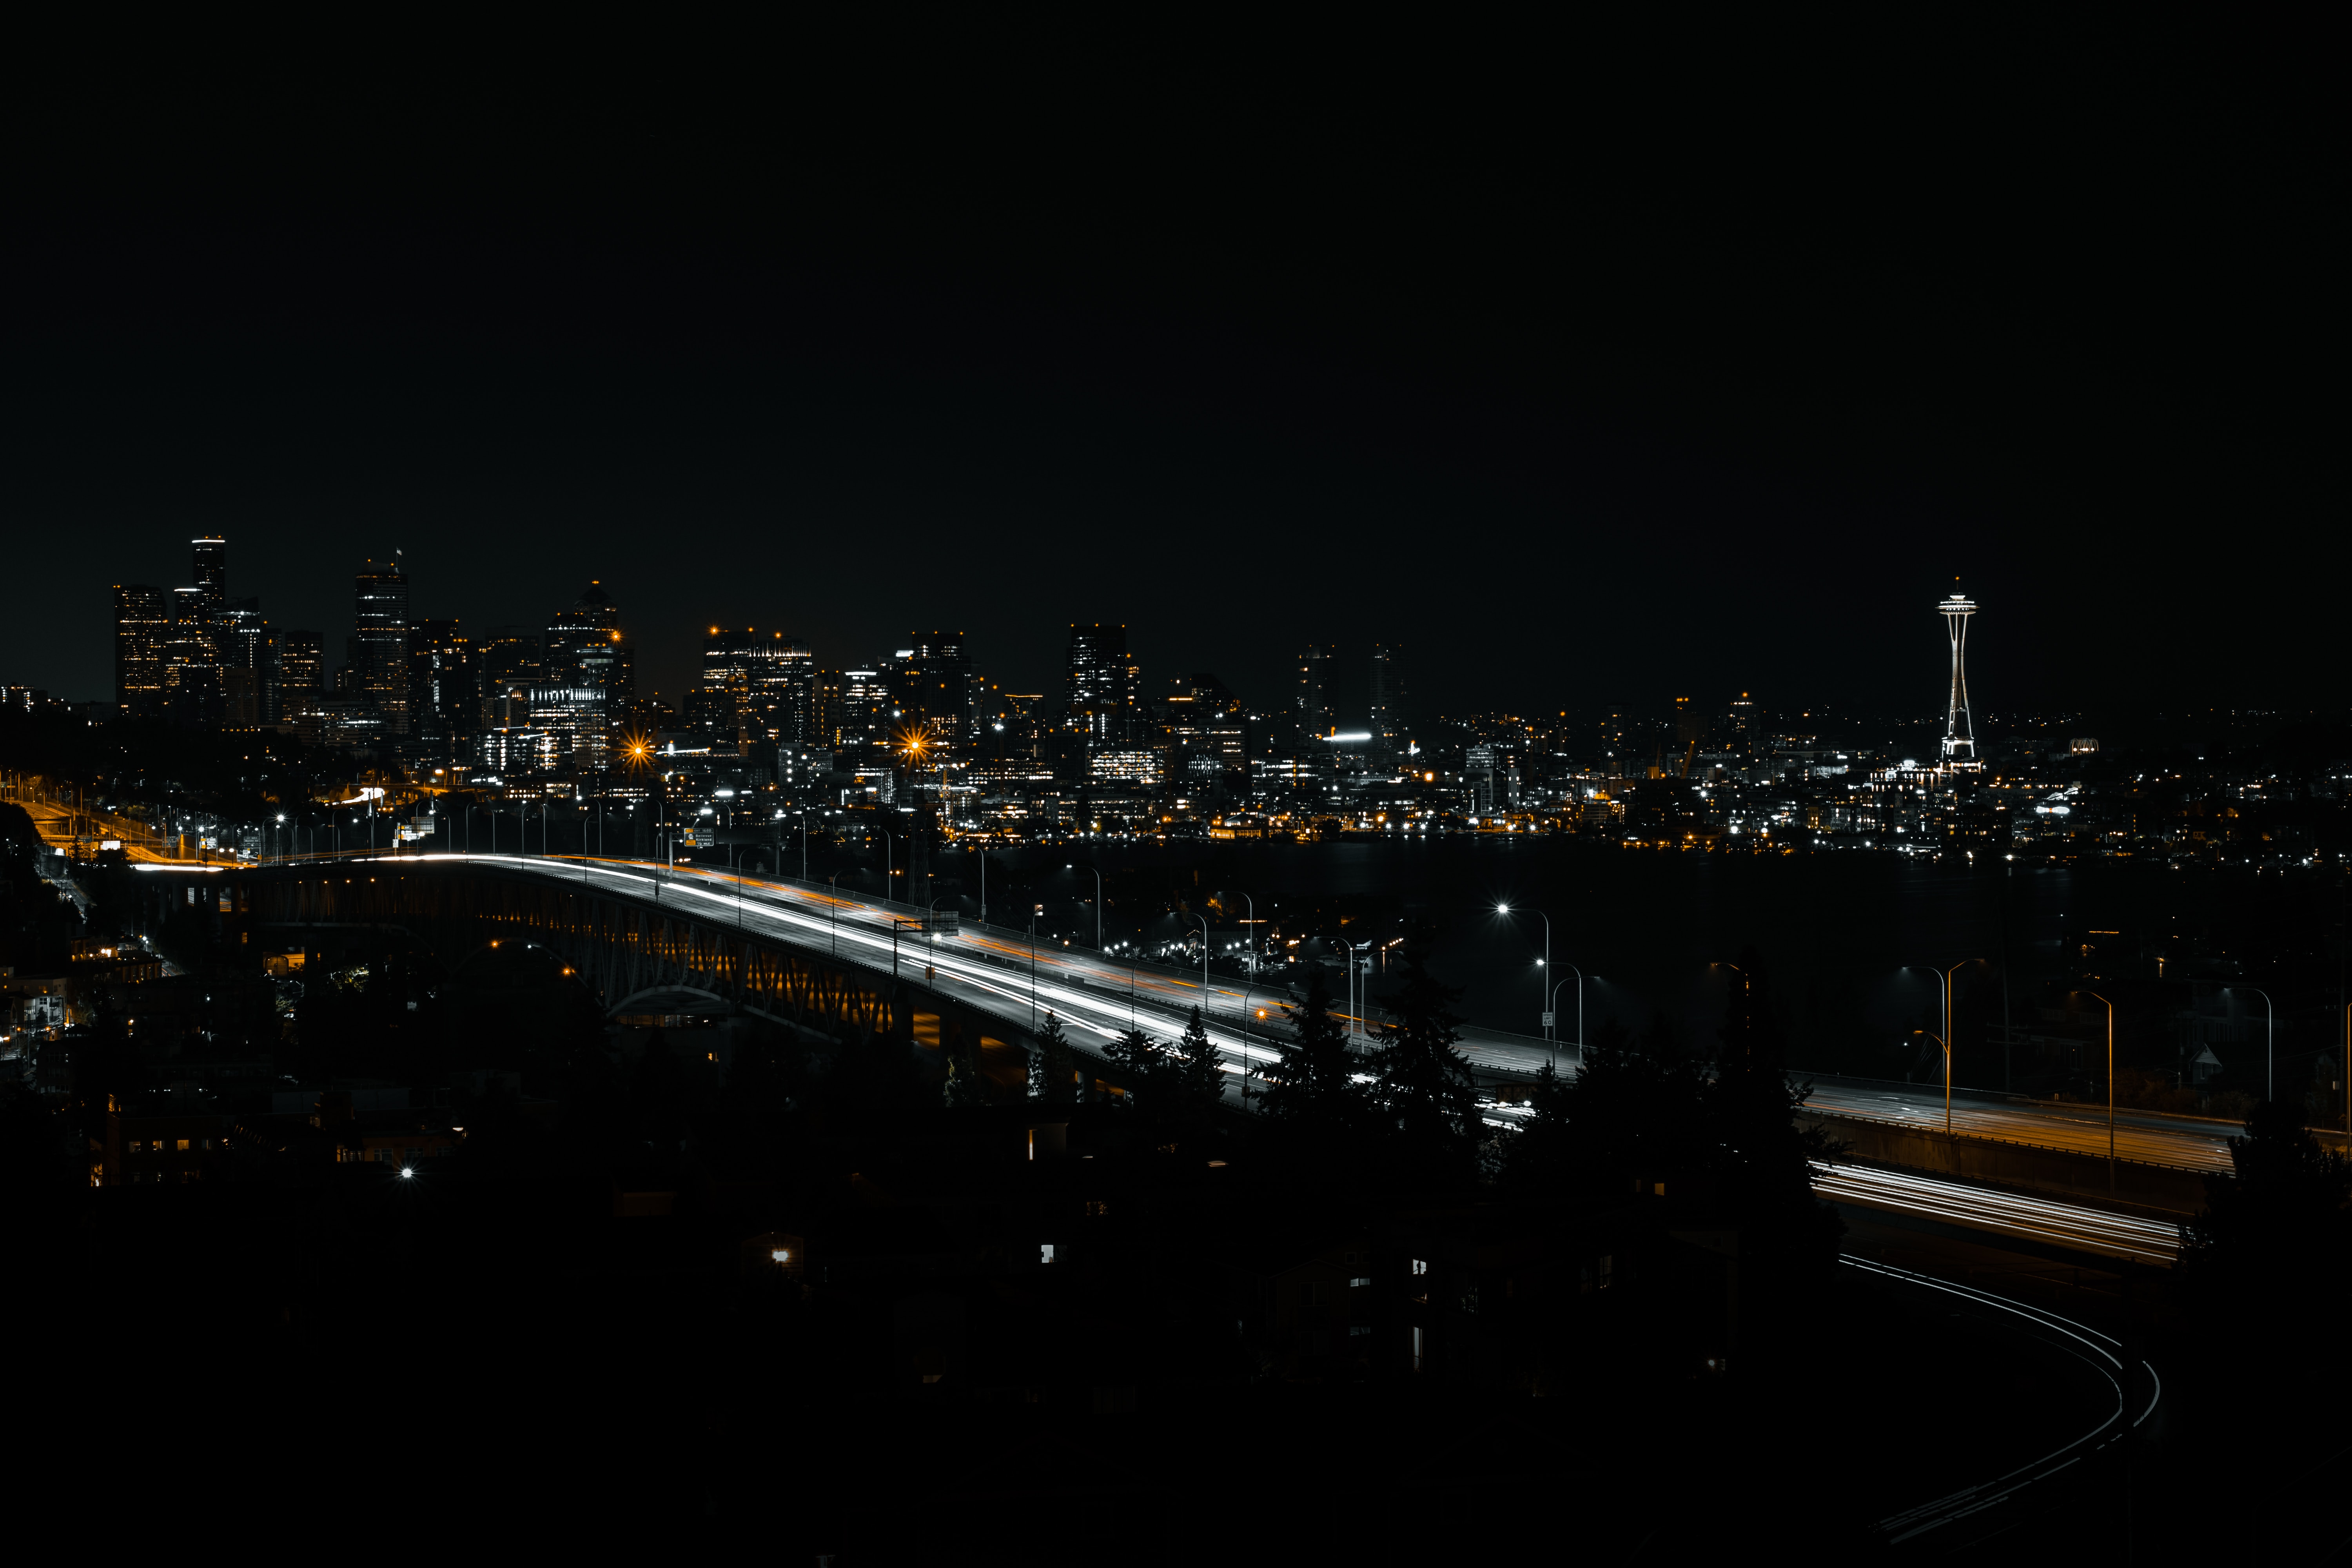 4K for PC architecture, cities, building, night Dark